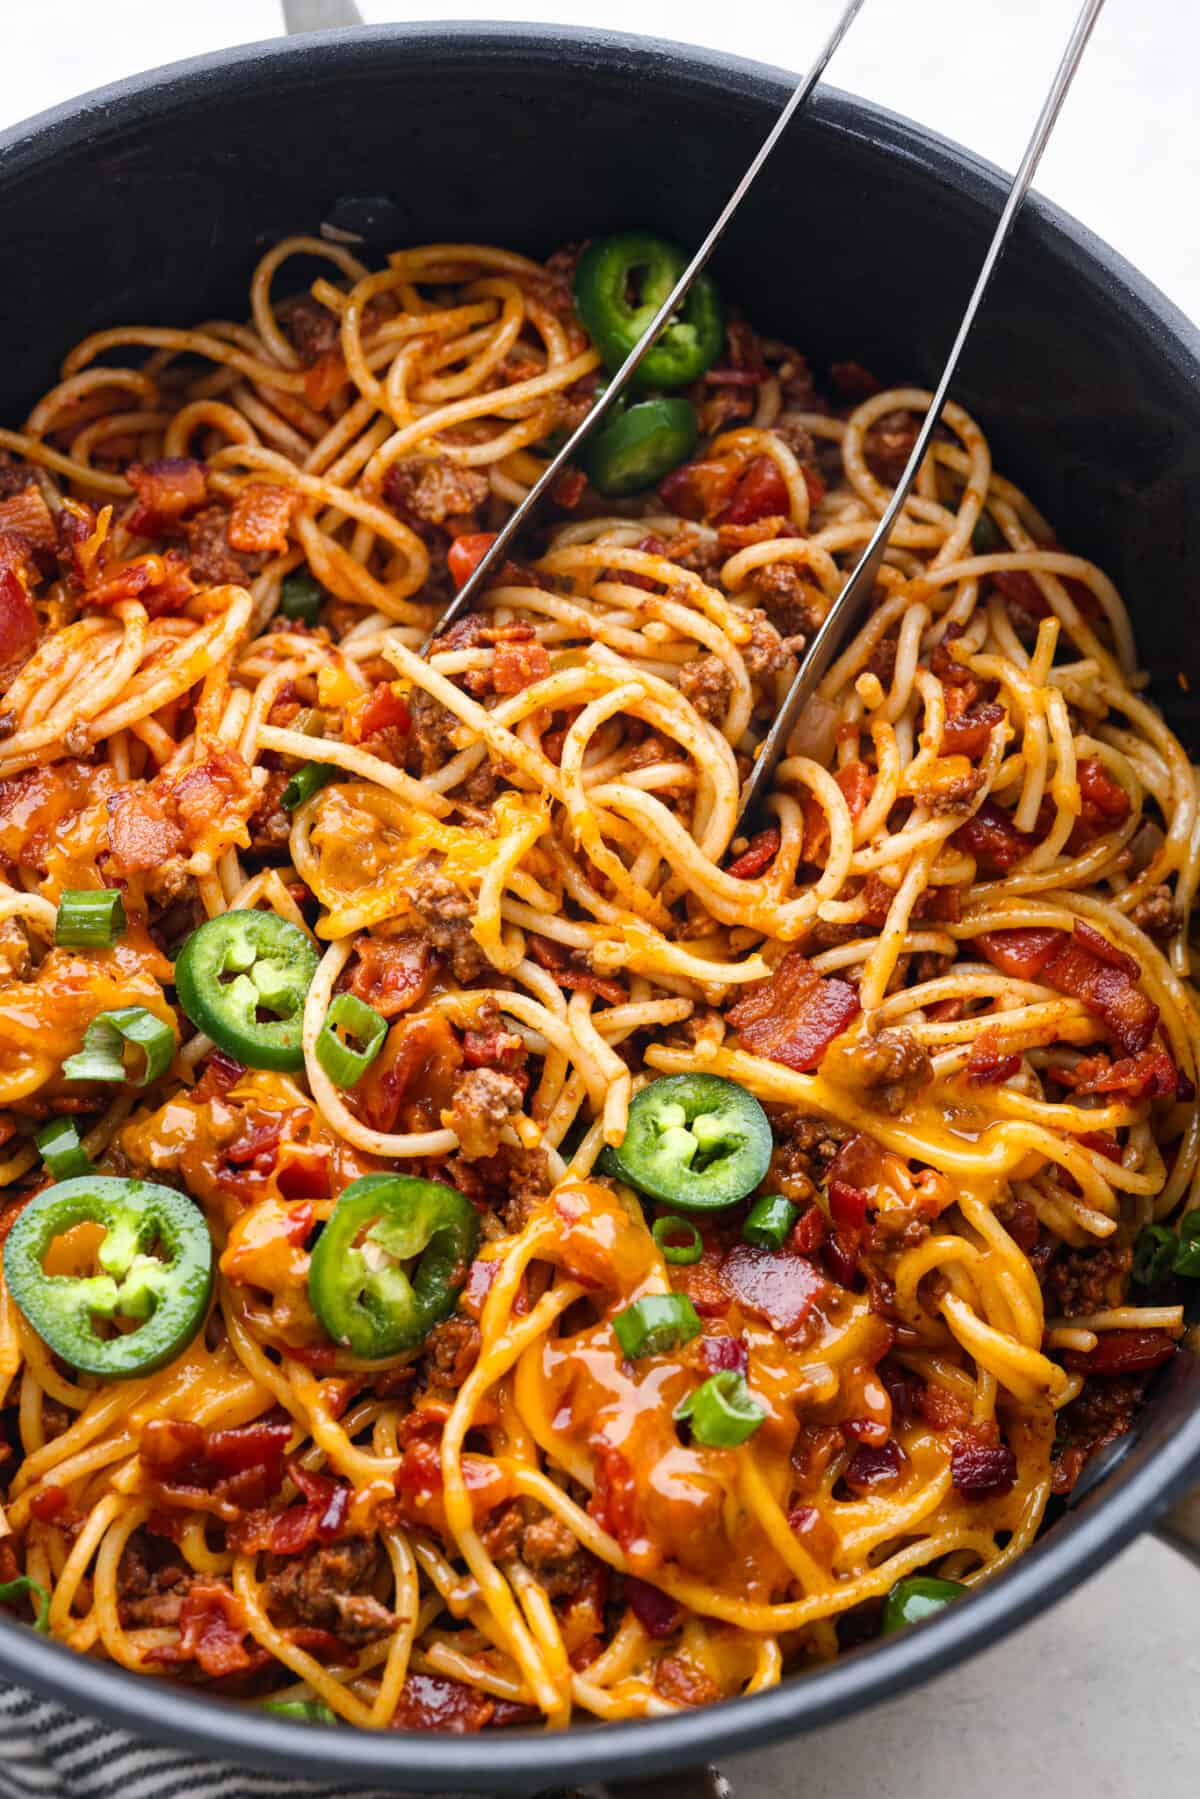 Spaghetti topped with shredded cheese, bacon, and jalapenos. - Cowboy Spaghetti